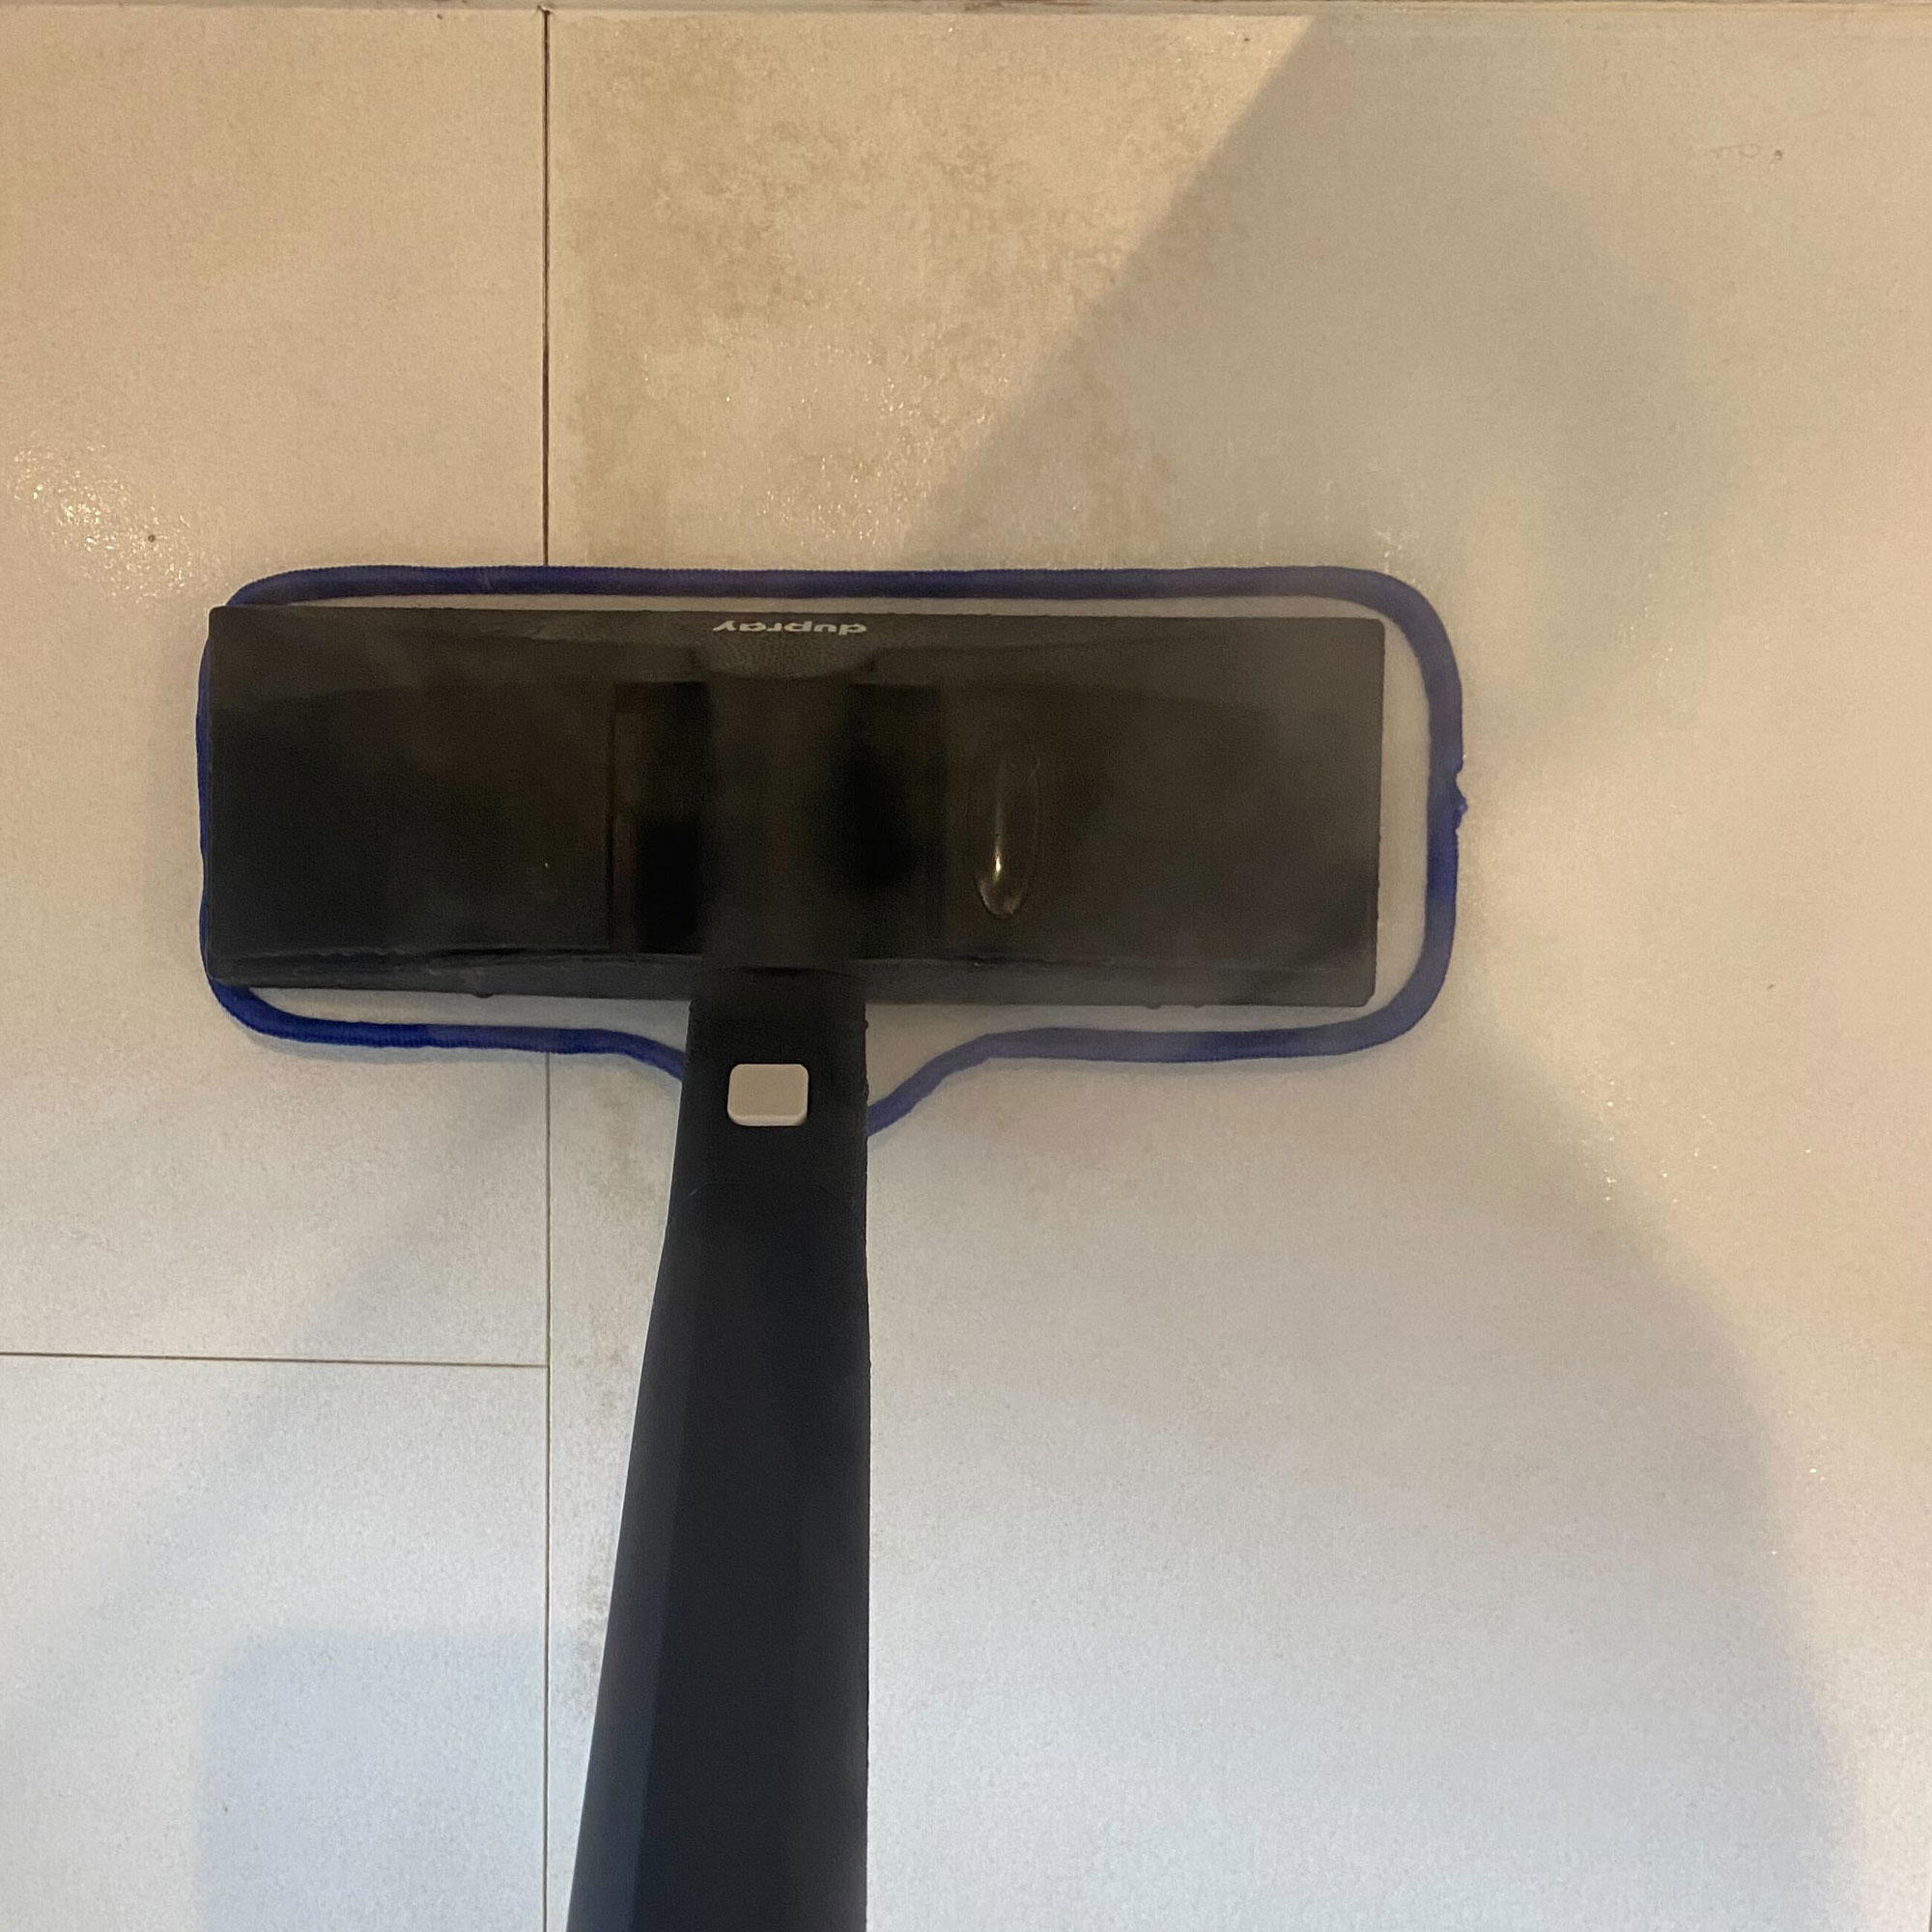 using the Dupray neat steam cleaner on bathroom floor stain